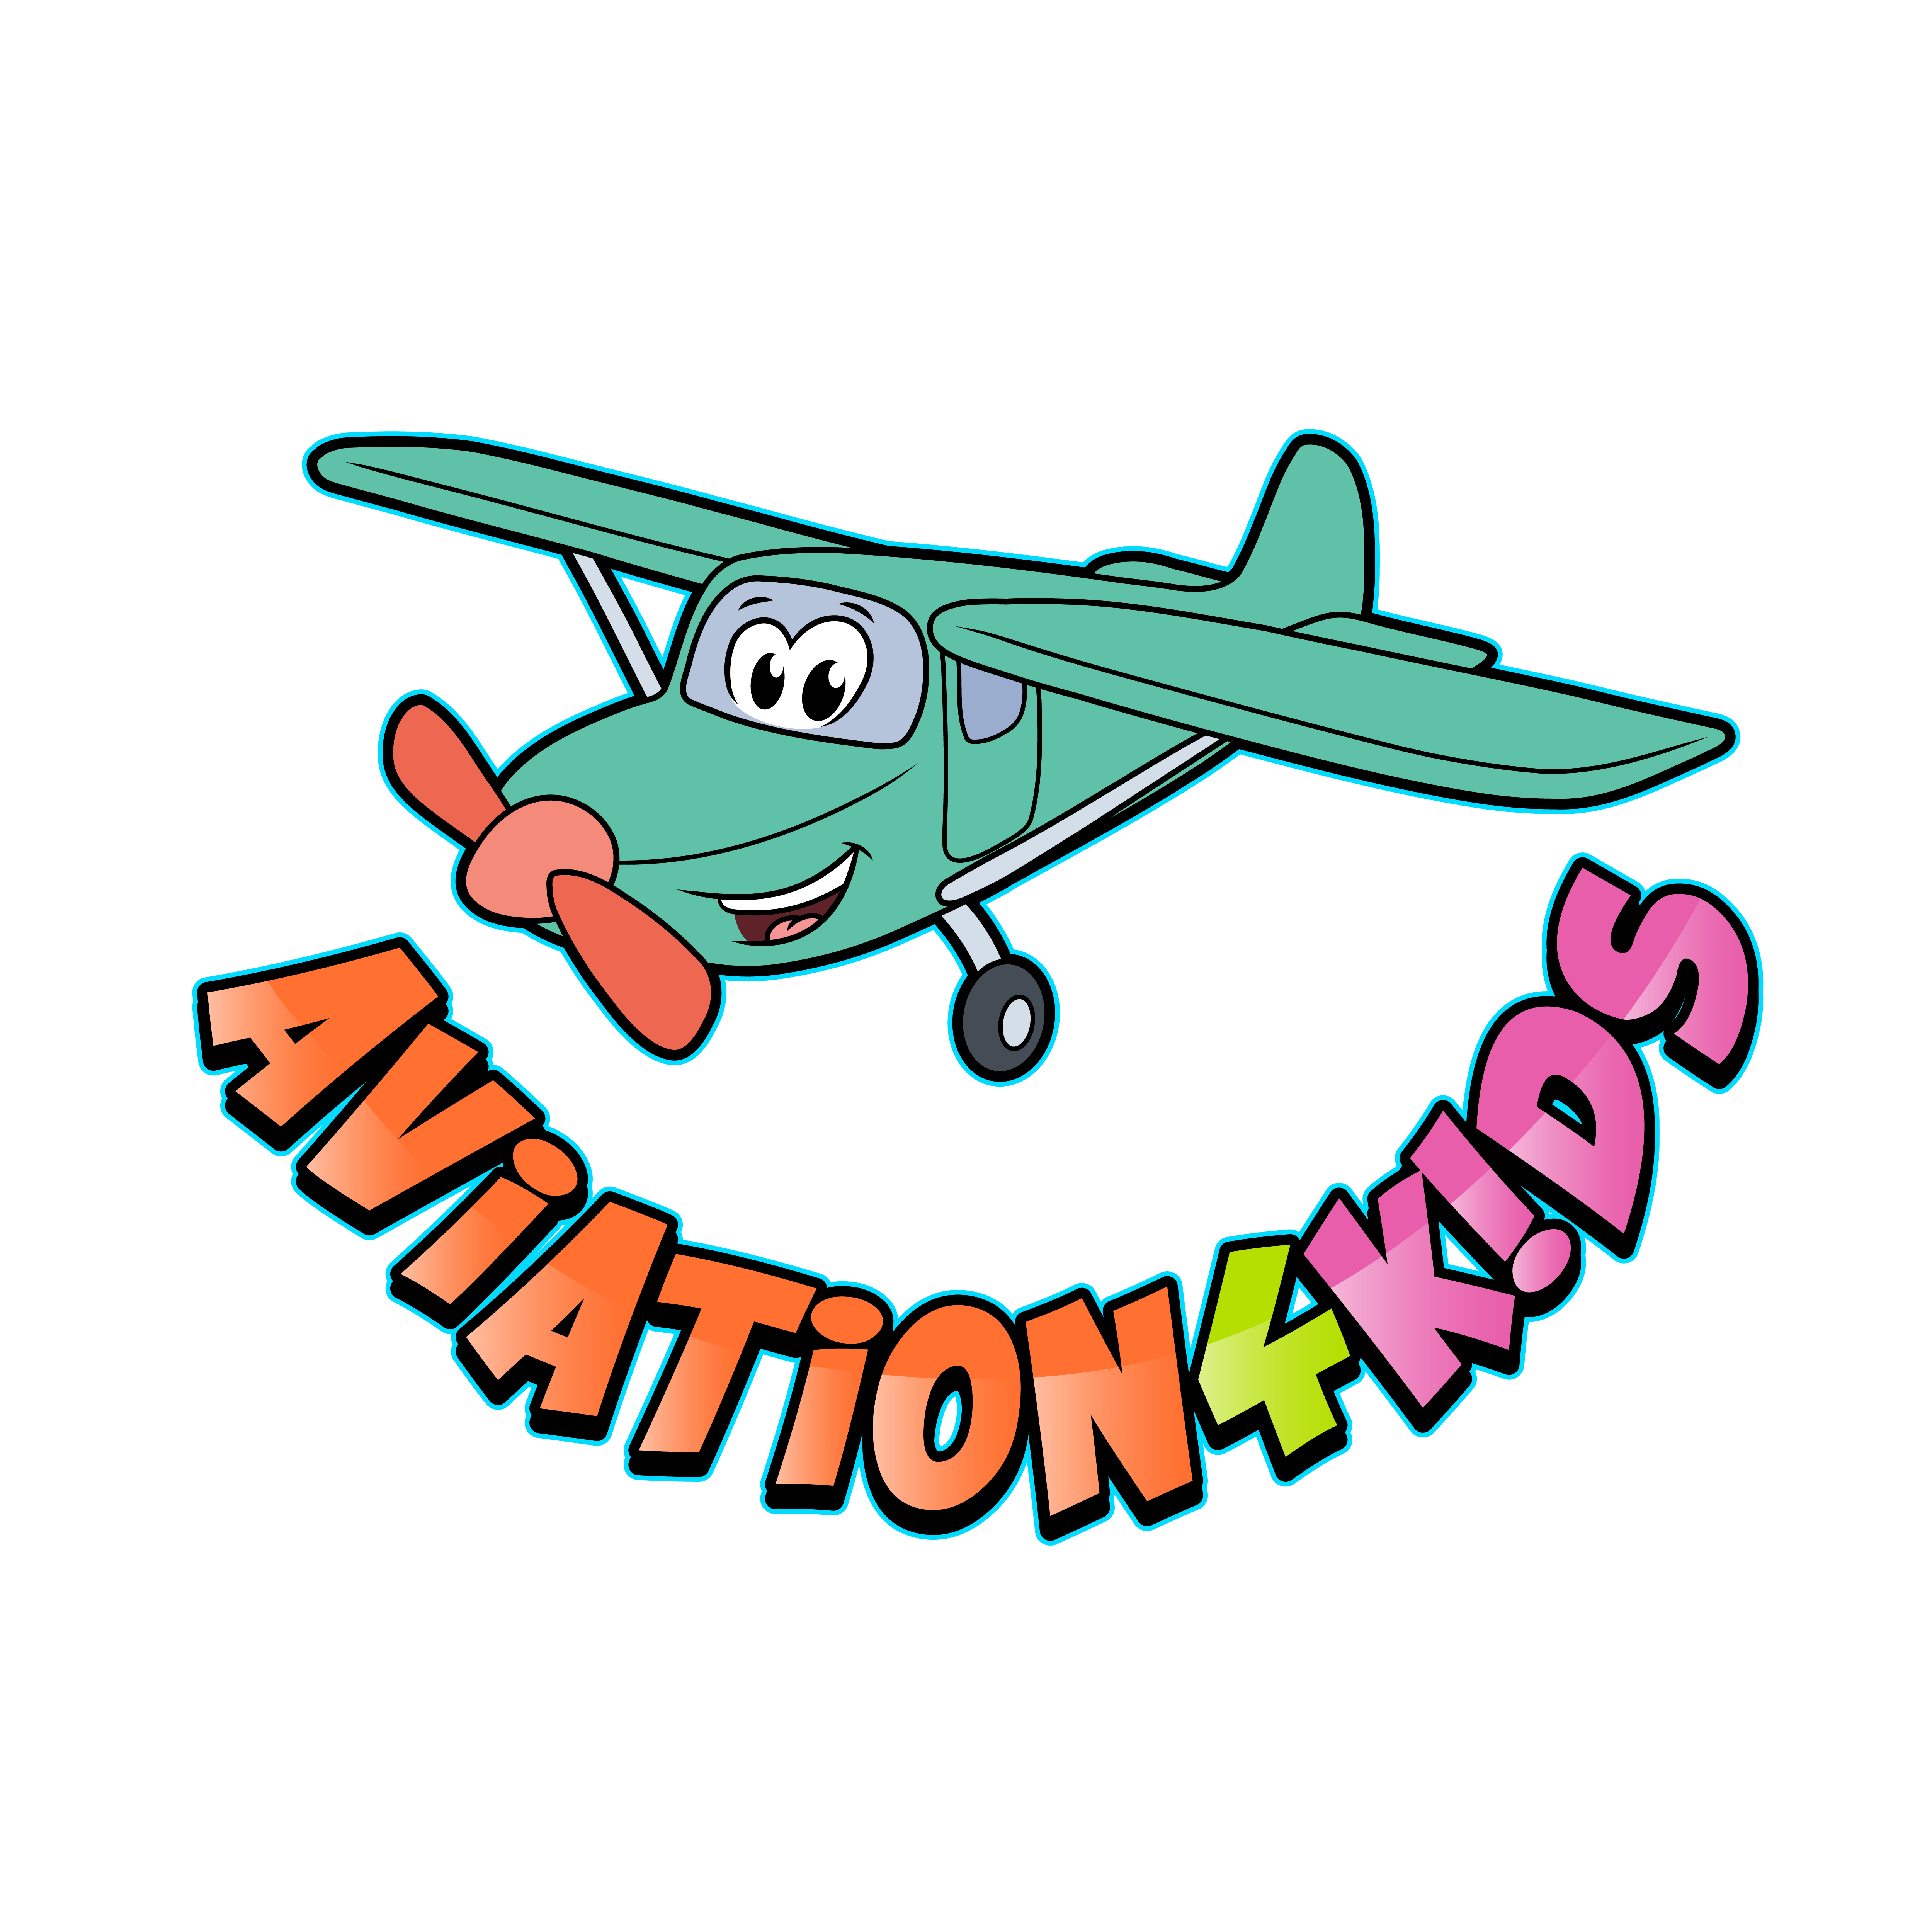 Events & Airshows Aviation 4 Kids